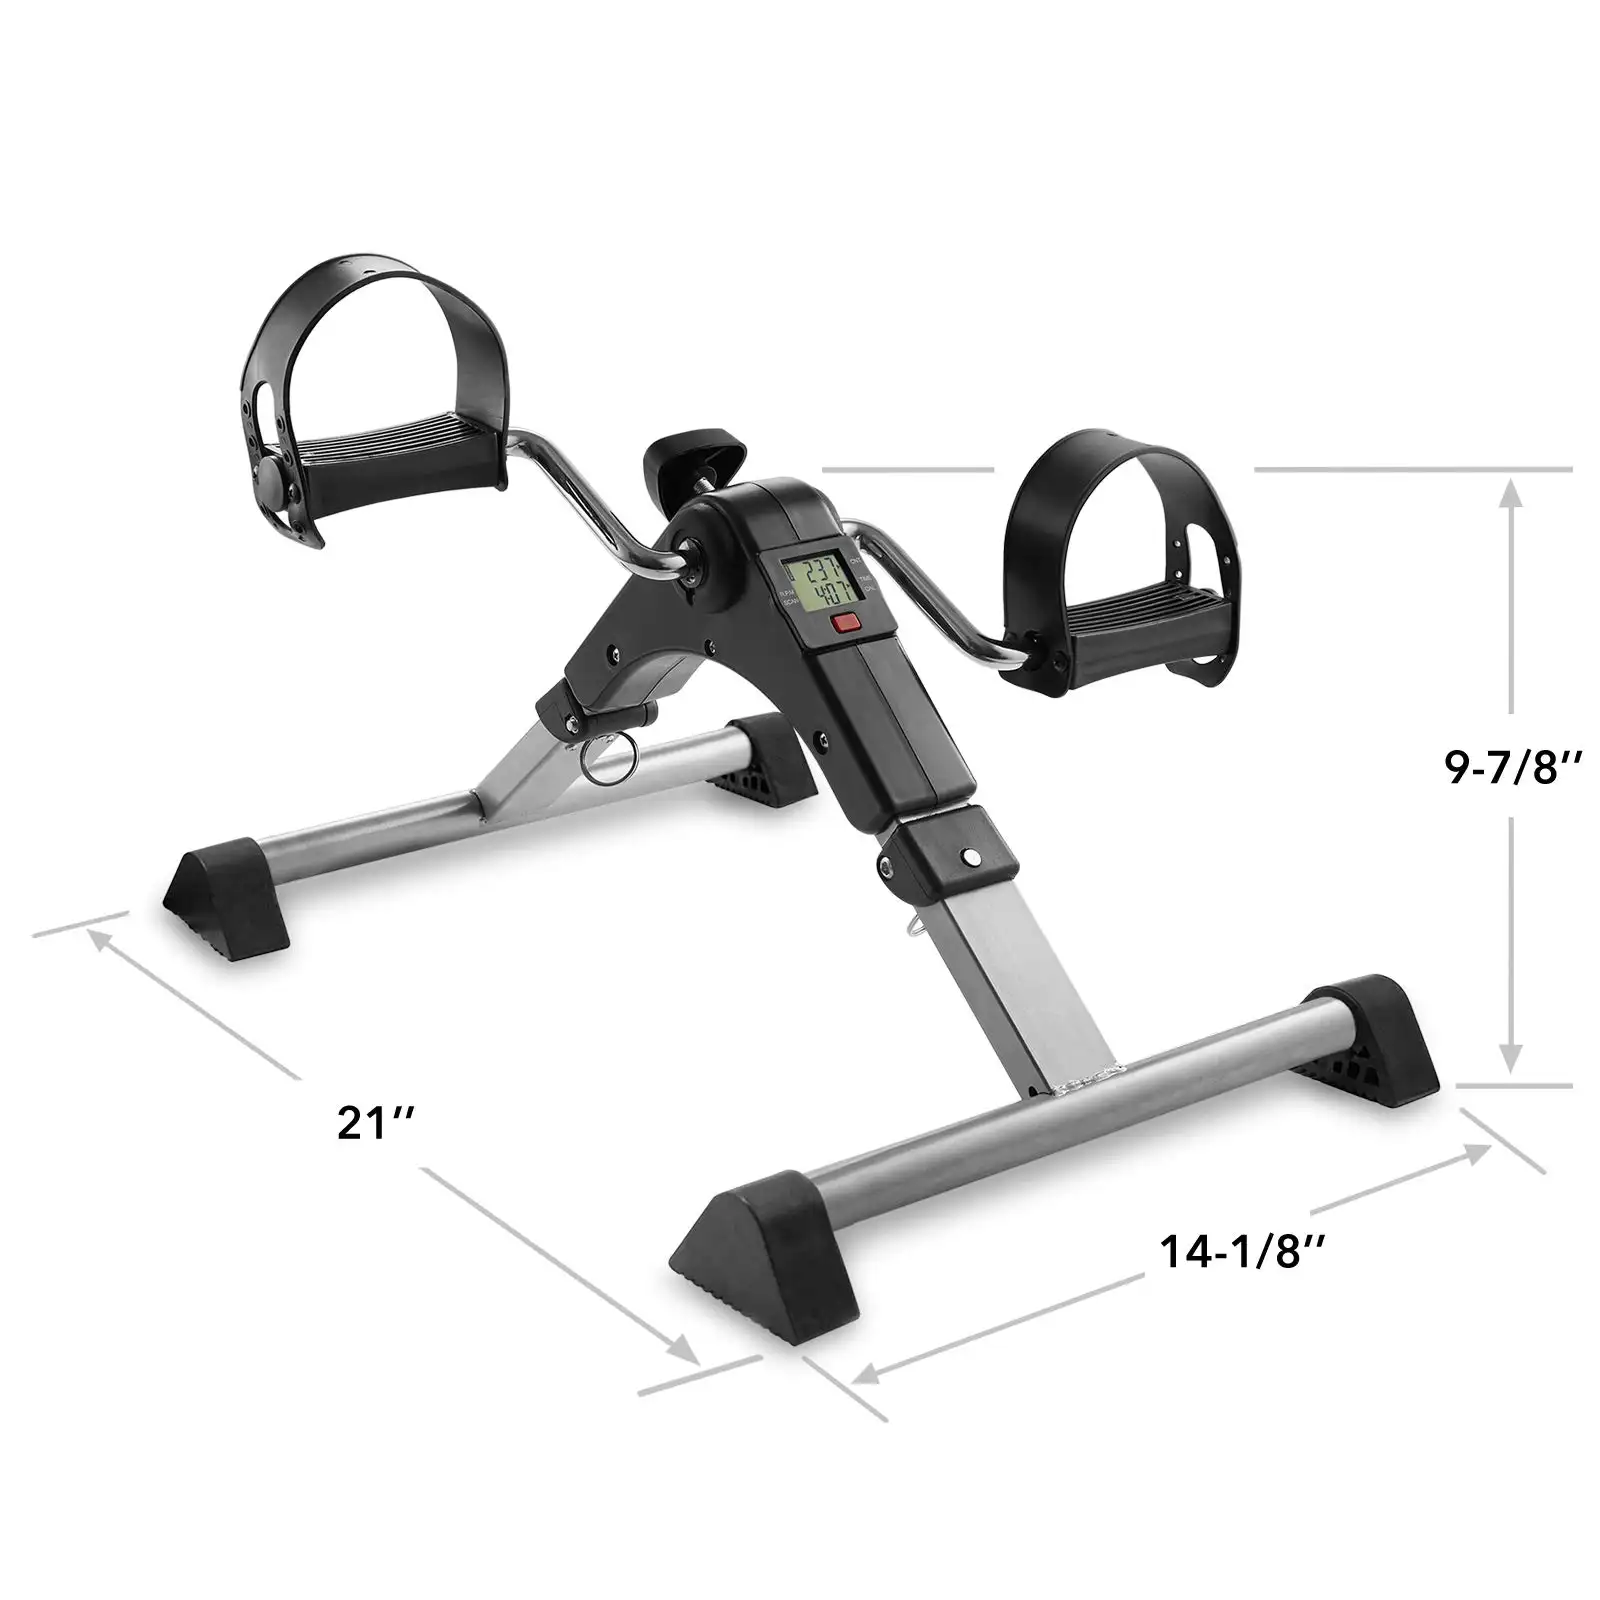 Xingsheng Medical Folding Pedal Exerciser with Electronic Display for Legs and Arms Workout Bike